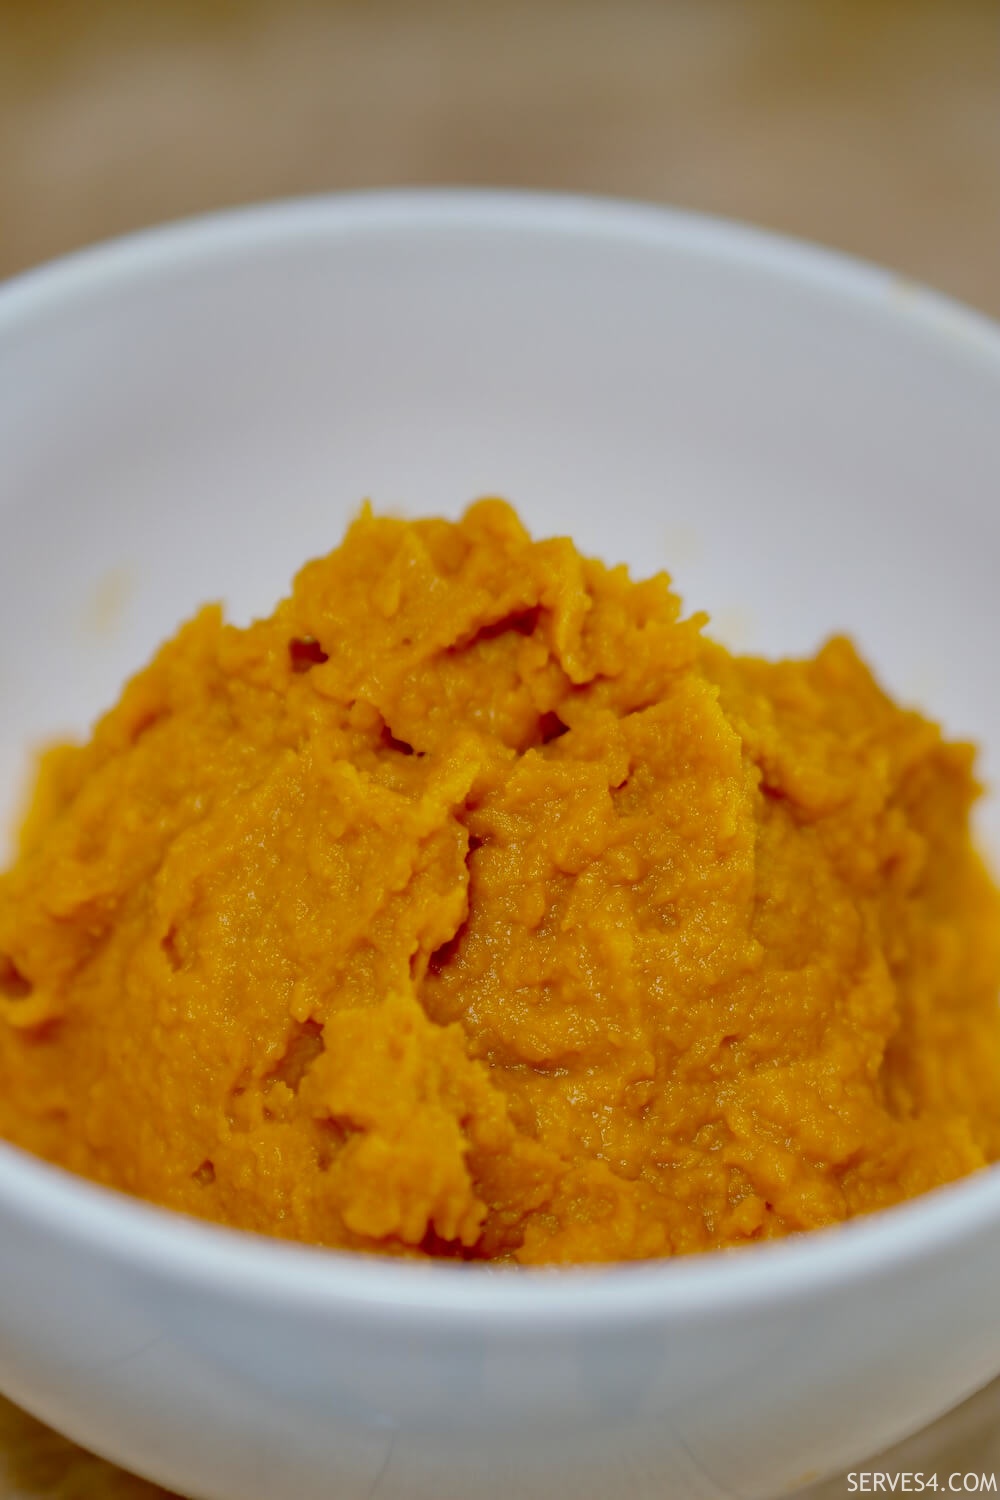 Pumpkin puree is an essential ingredient in many an autumn baking recipes, and it's so easy to make your own.